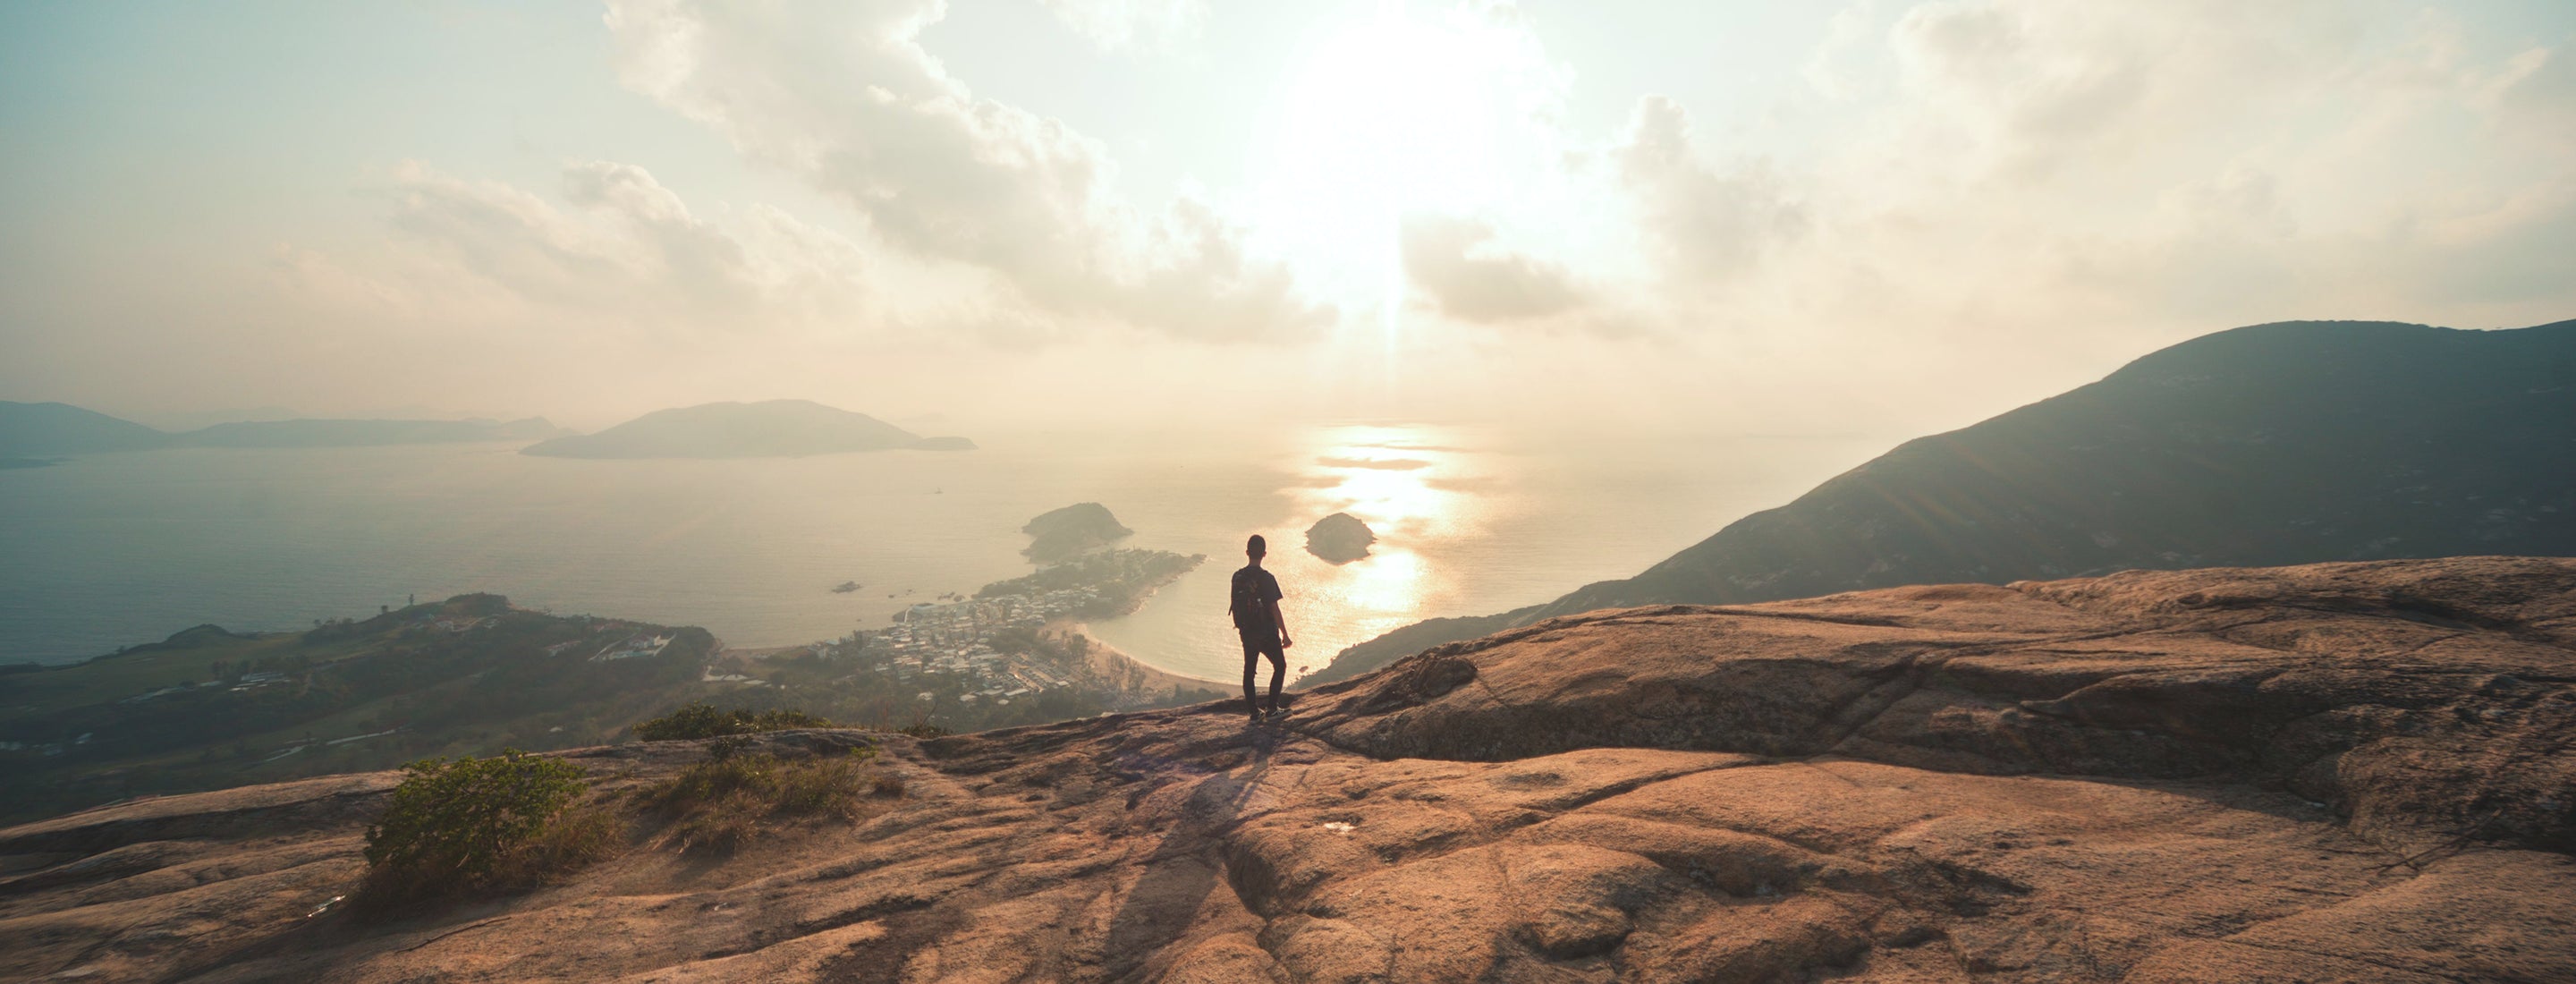 Image of a distant person overlooking a coastline from a mountain side.